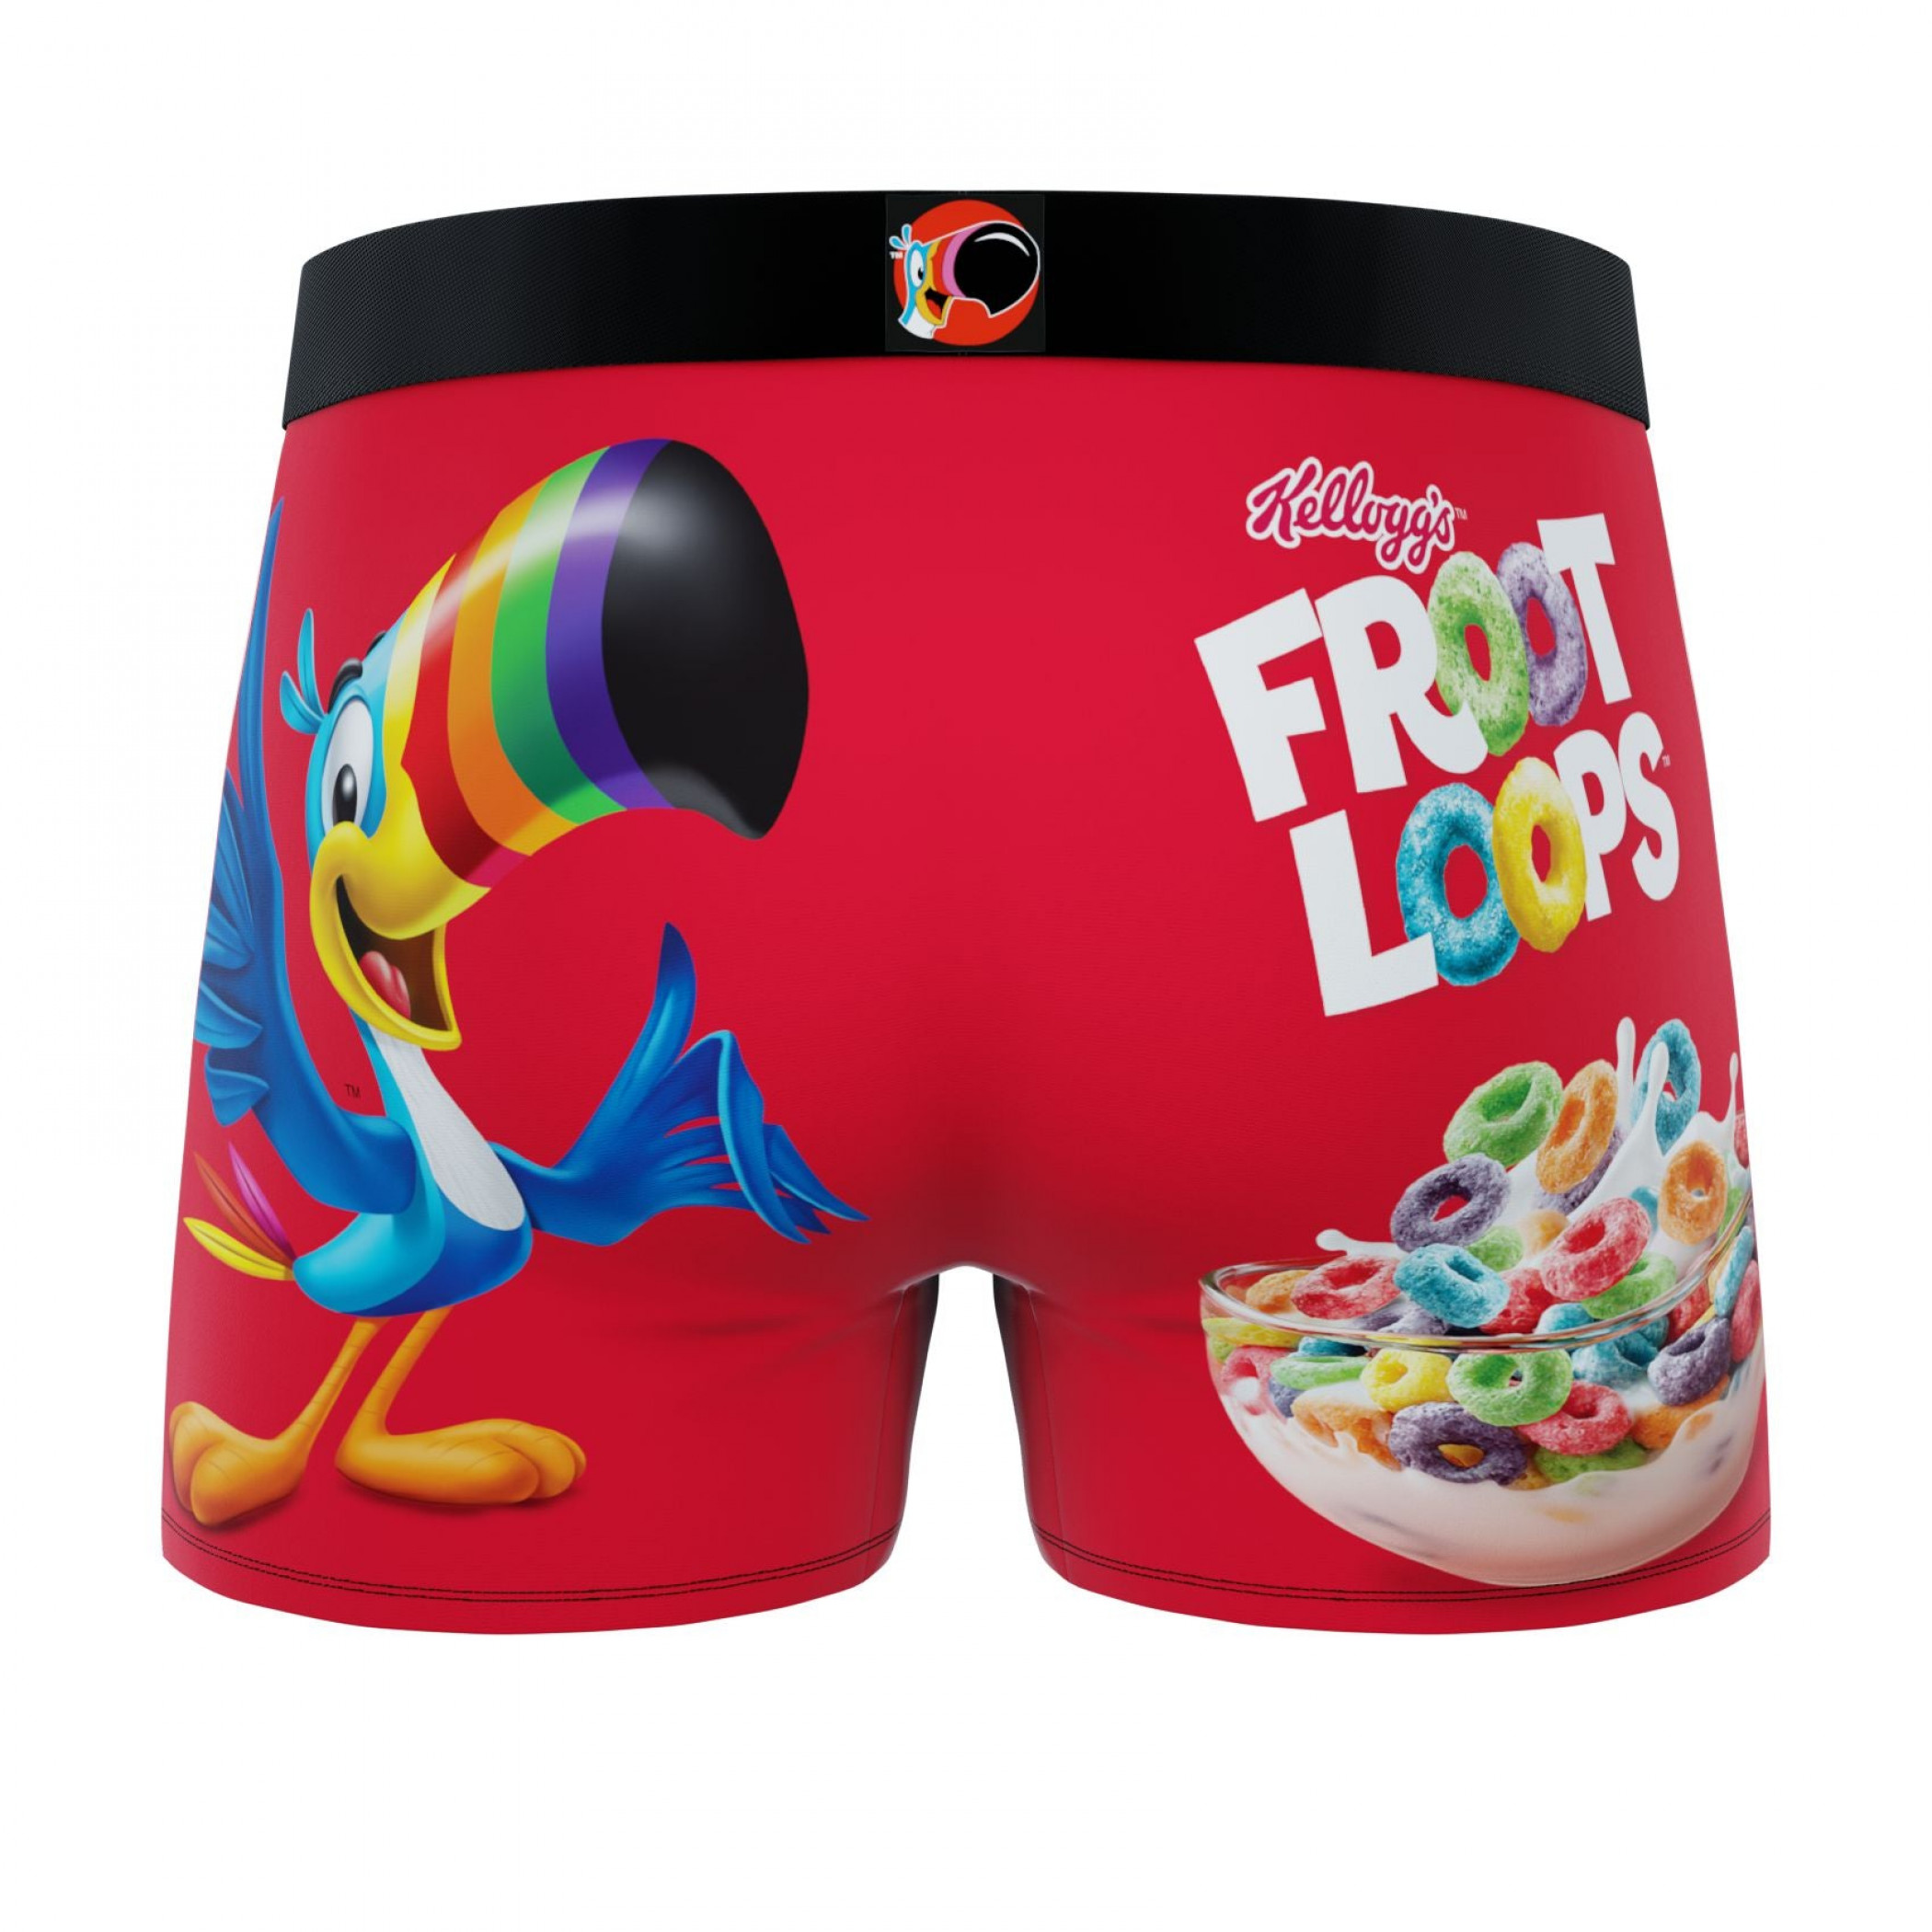 Kellogg's Frosted Mini-Wheats Cereal Box Style Swag Boxer Briefs